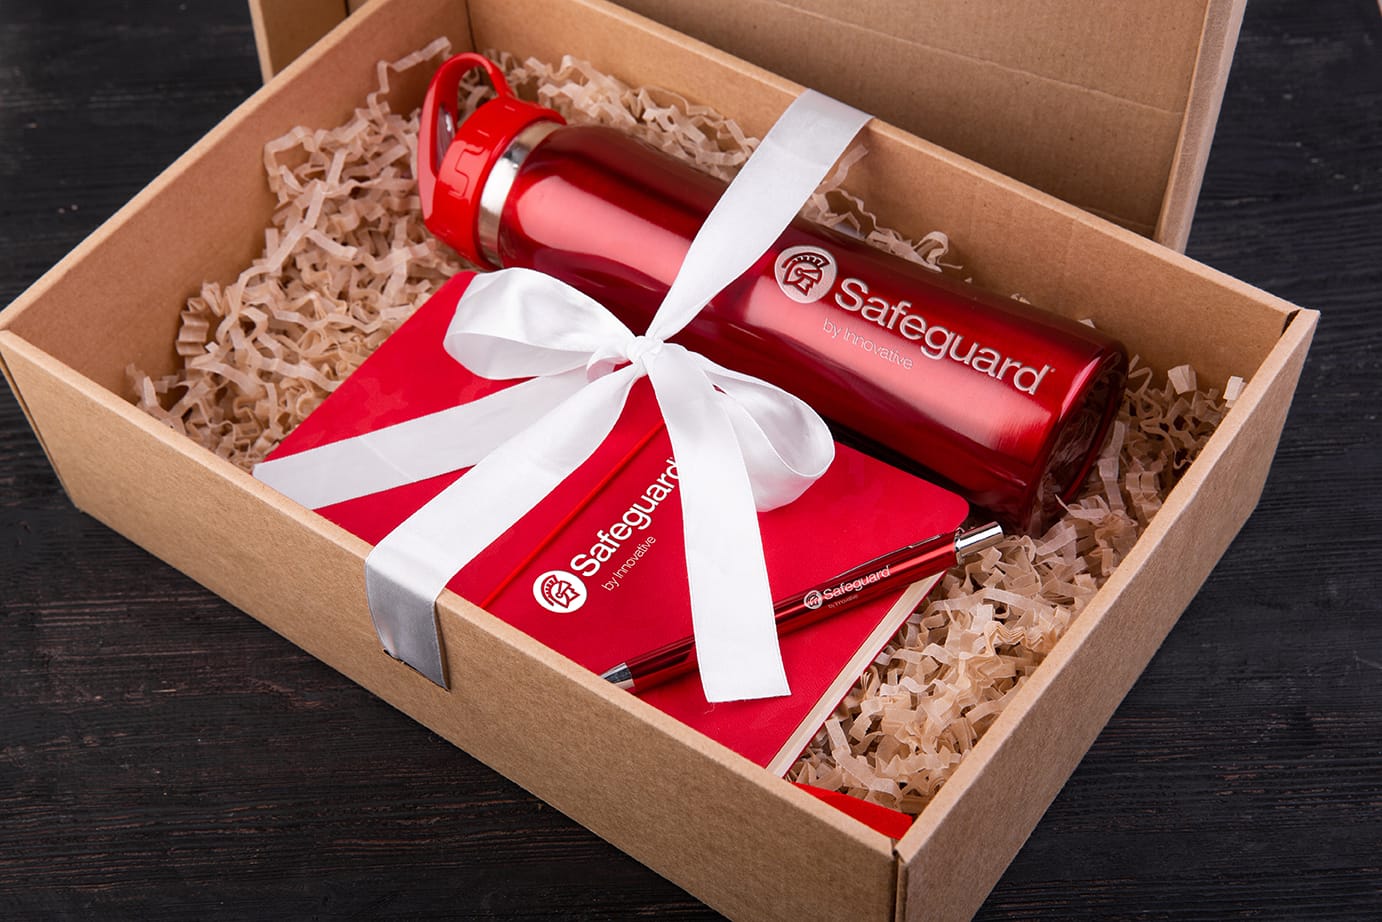 A gift box with Safeguard water bottle, notepad, and pen